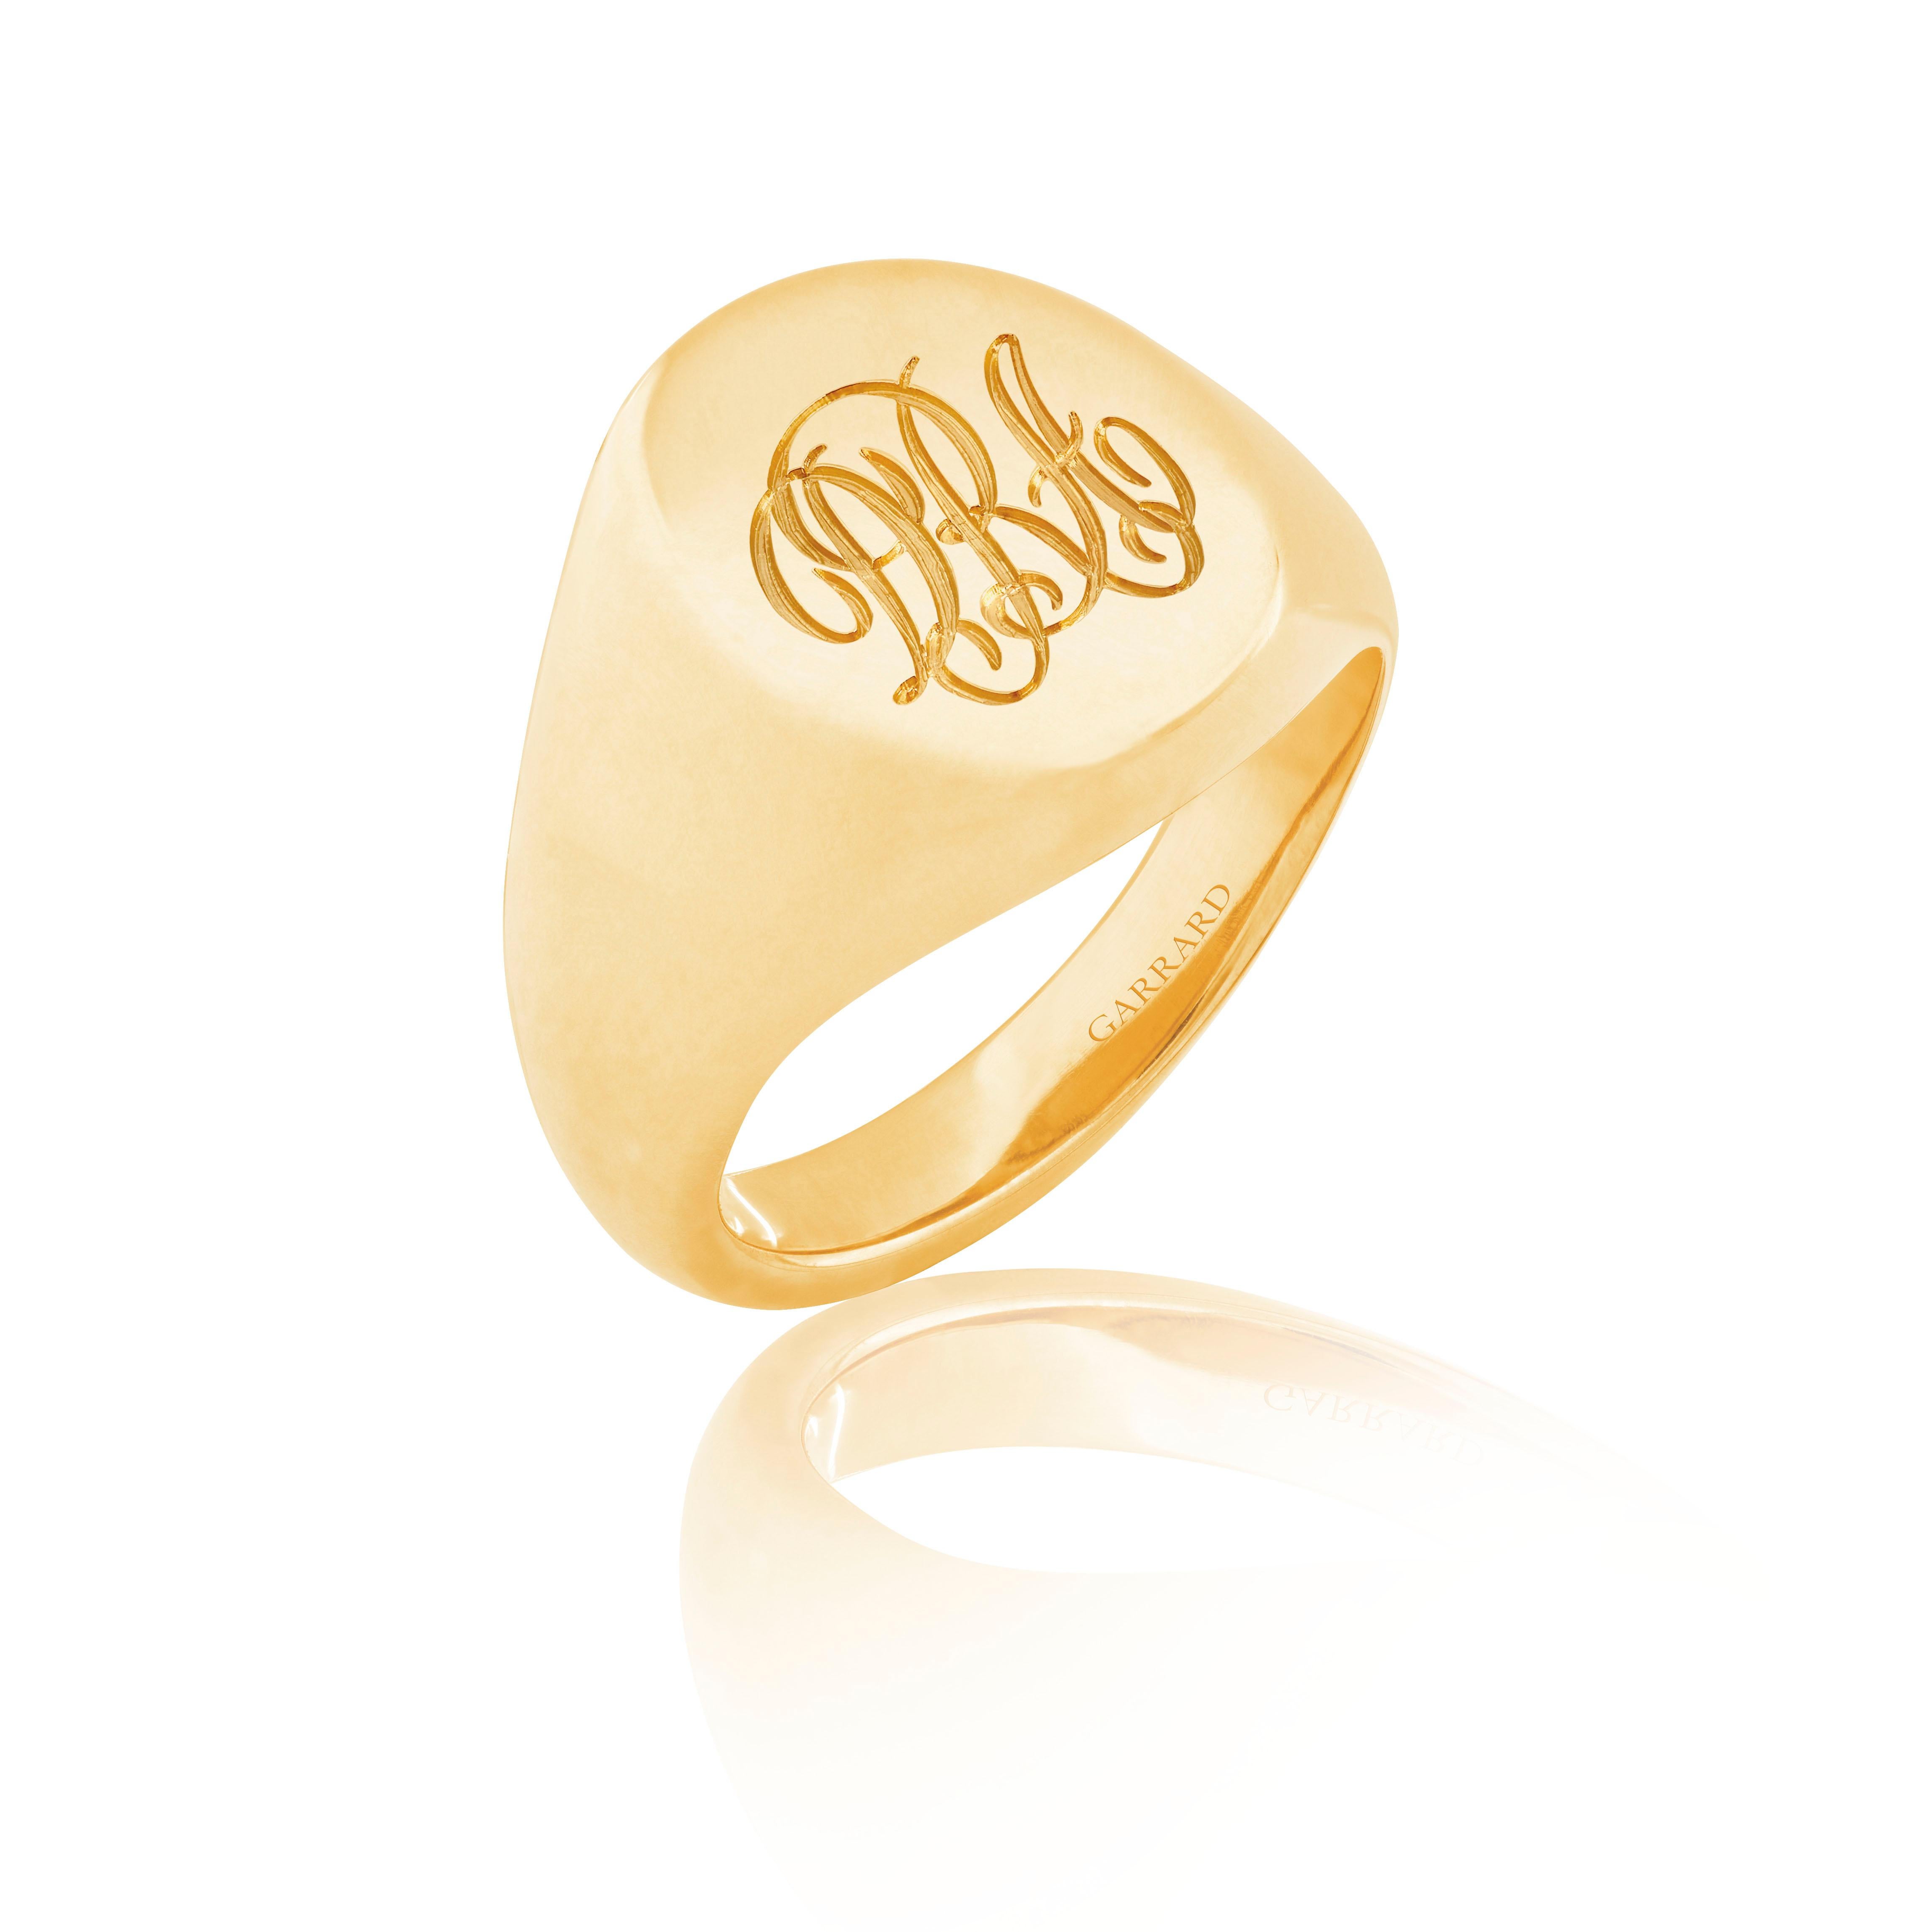 A House of Garrard 18 karat yellow gold large oval signet ring.

Head dimension: 16mm x 13mm
Size 54

Complimentary engraving of up to three initials in a script font is included. Please allow an additional two weeks to the standard shipping and